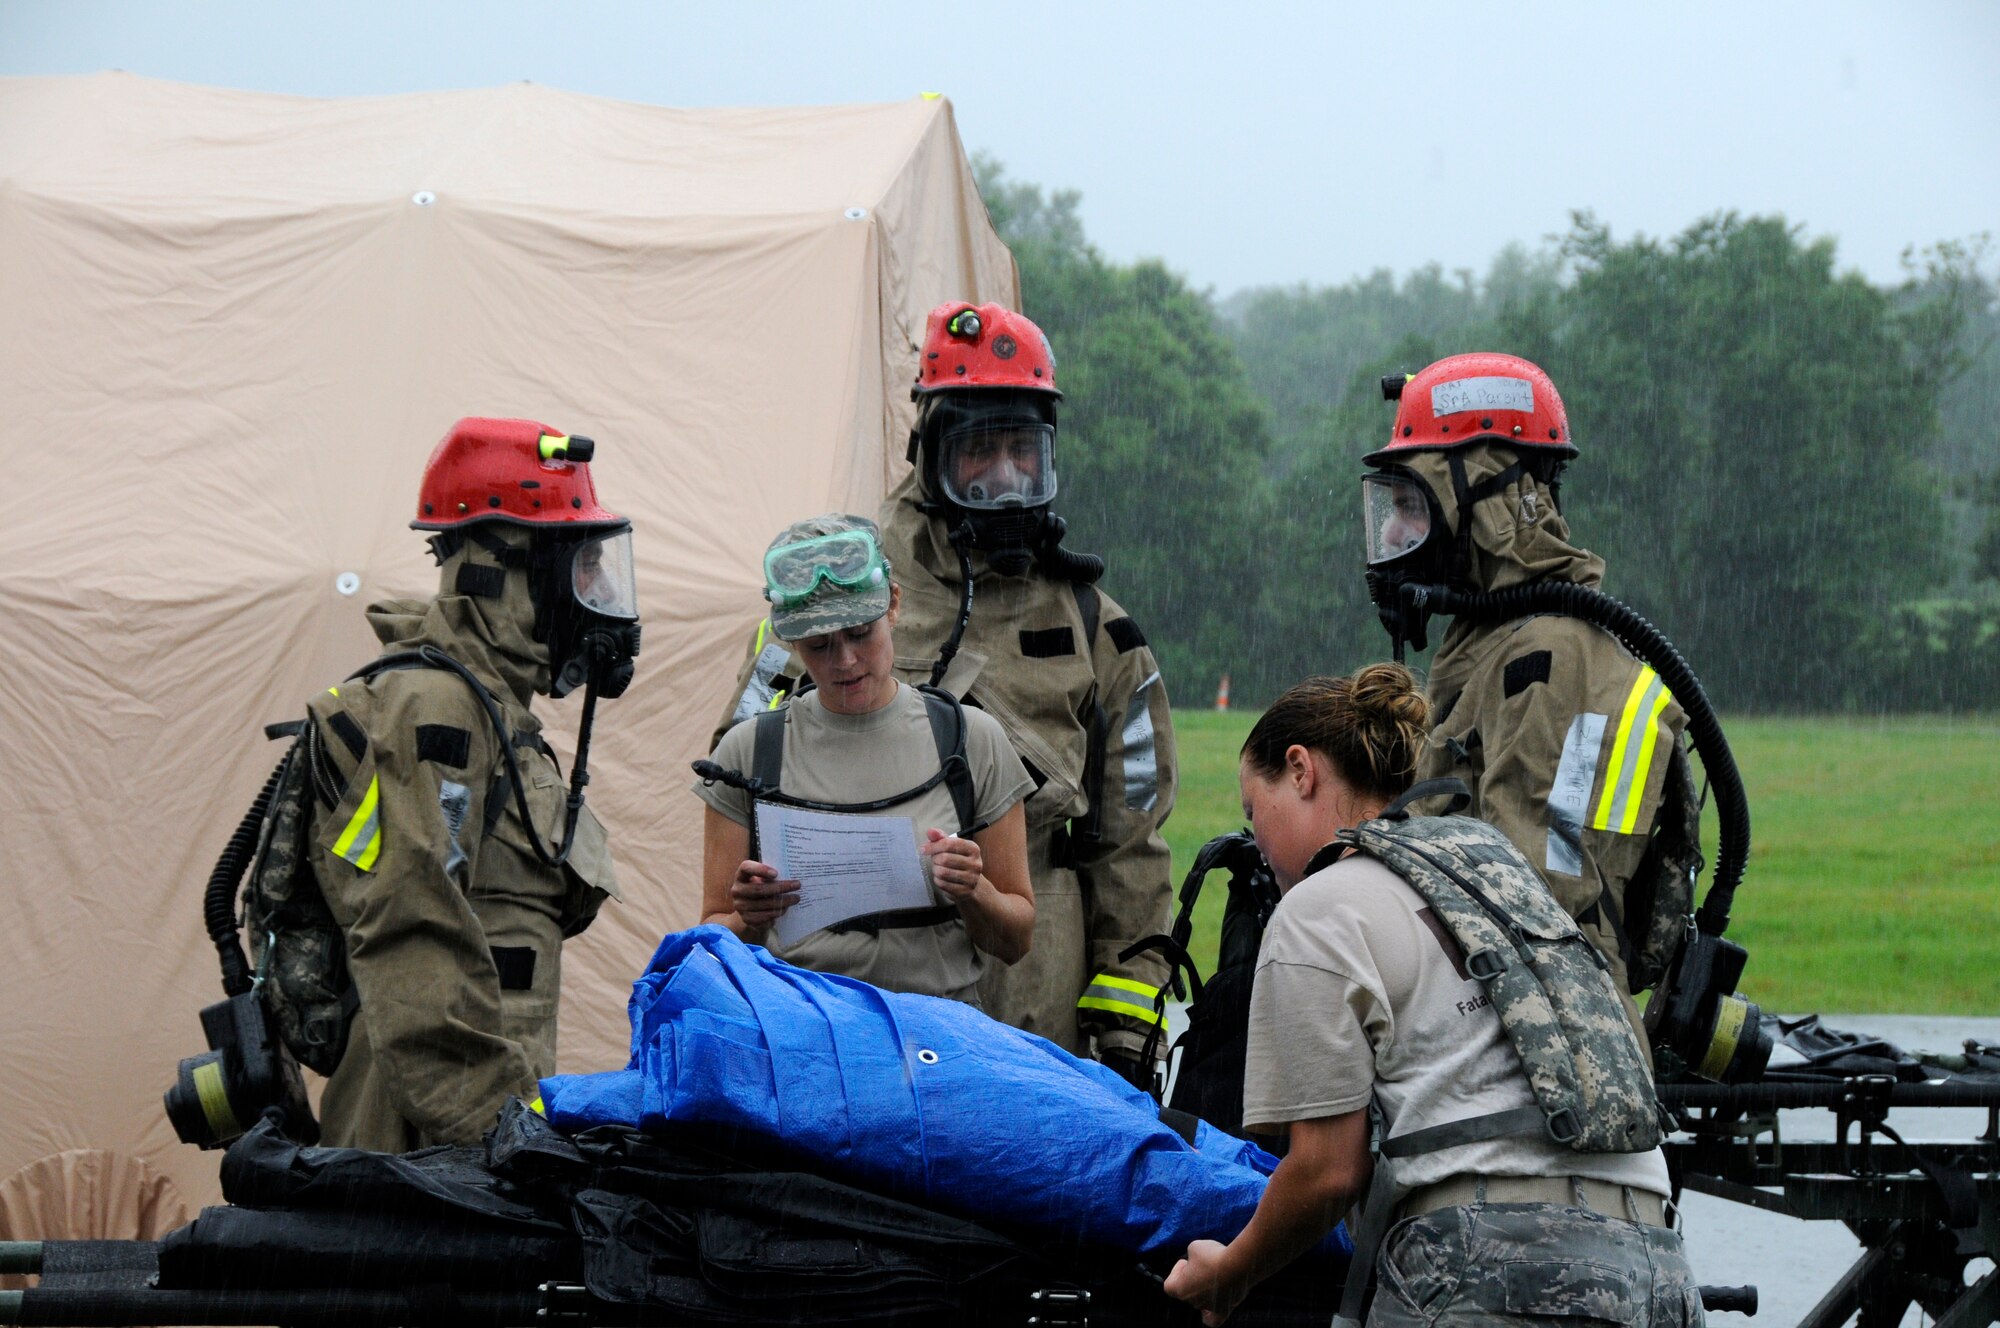 Members from the 182nd Airlift Wing's Fatality Search and Recovery Team (FSRT) review their checklist as they load a litter carrier with equipment before entering a "hot zone" during a CERFP exercise at the Boone County Fire District Training Center near Columbia, Mo., June 17, 2015 (U.S. Air National Guard photo by Tech. Sgt. Todd Pendleton)(Released)   